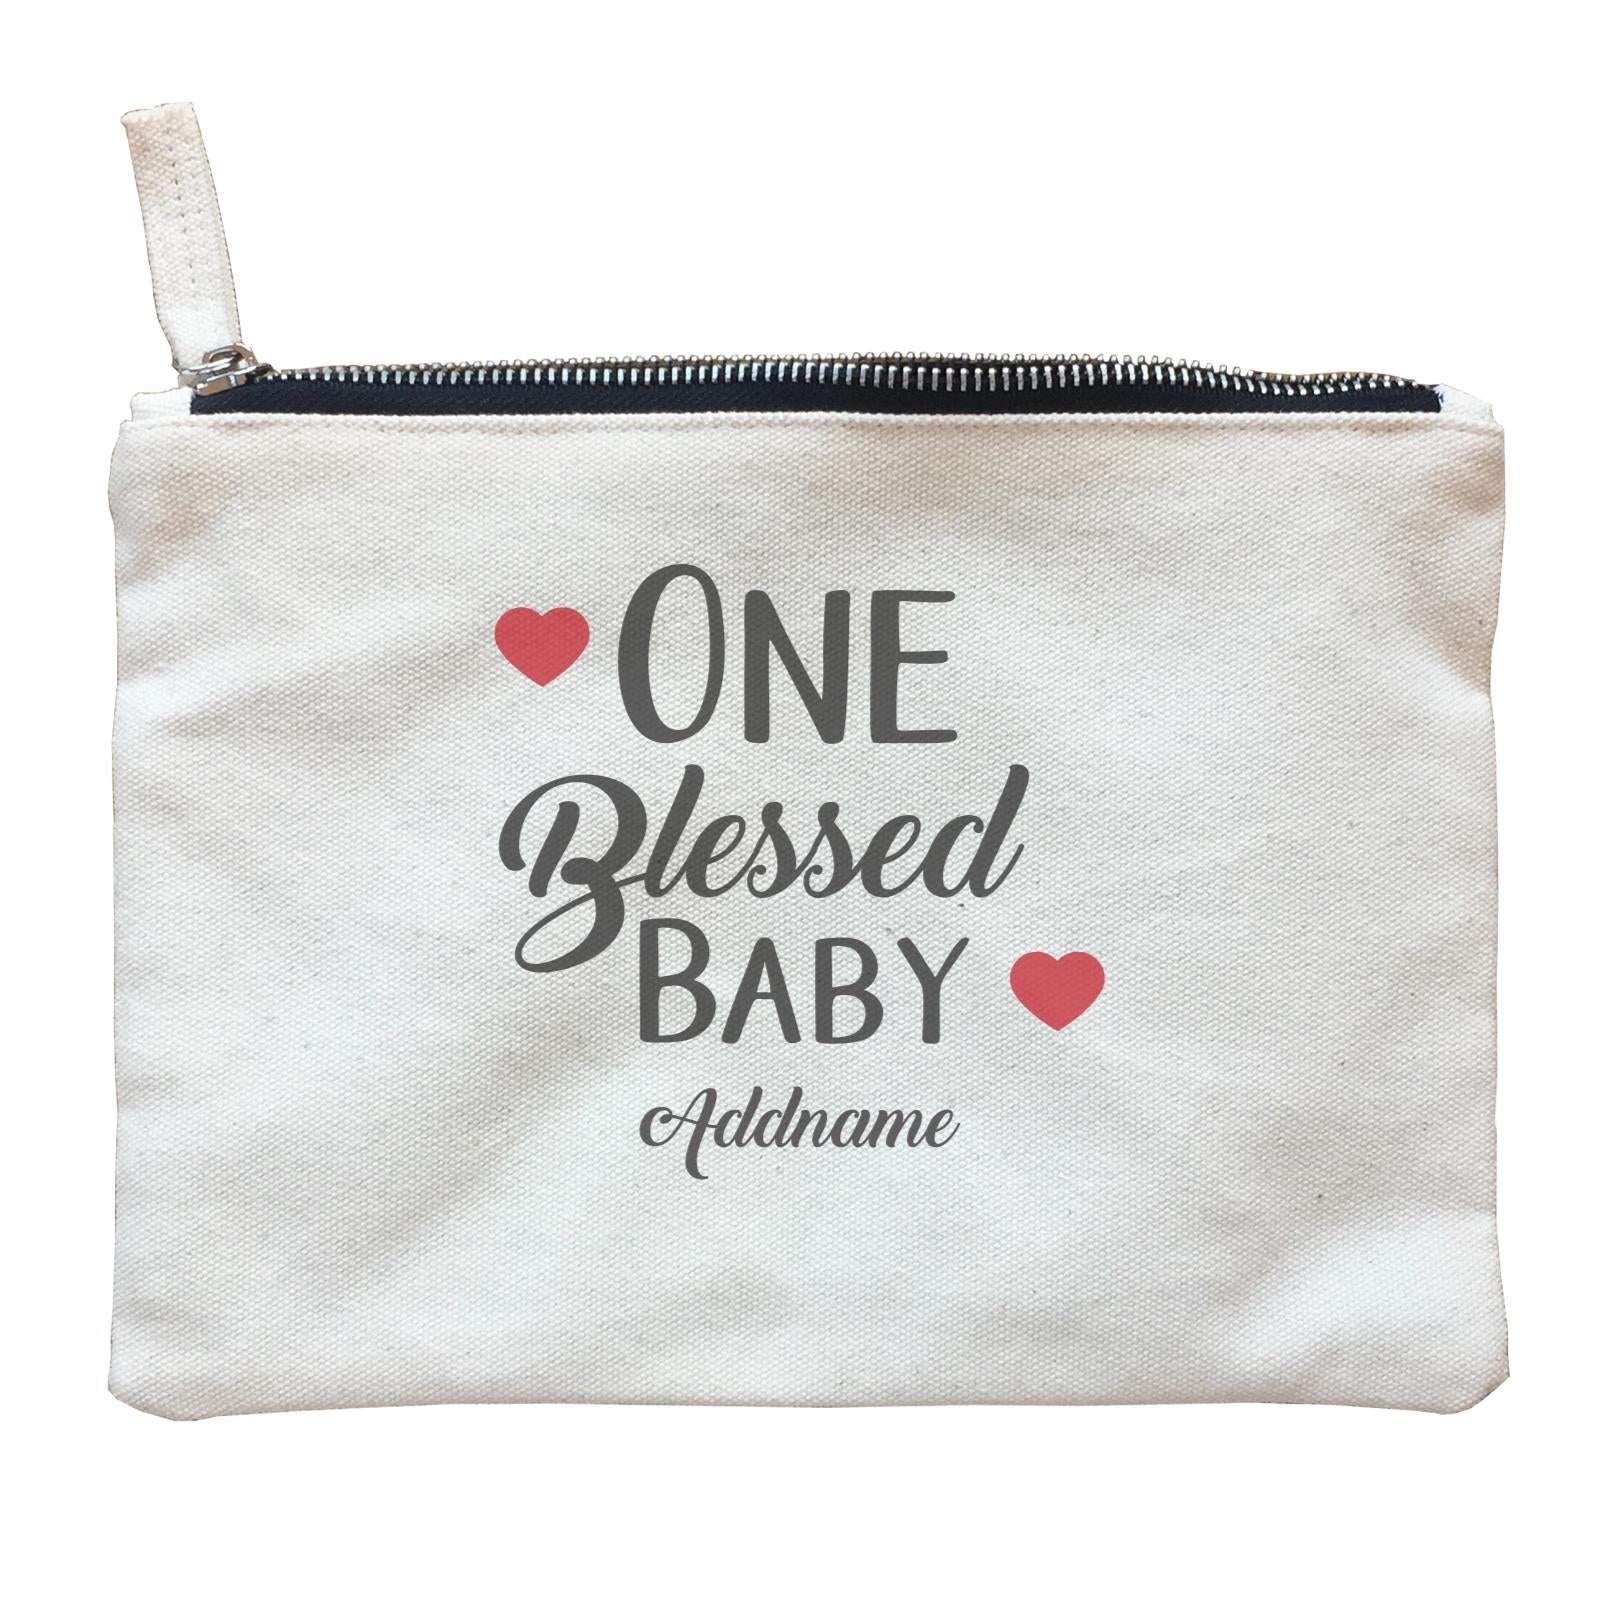 Christian Series One Blessed Baby Addname Zipper Pouch